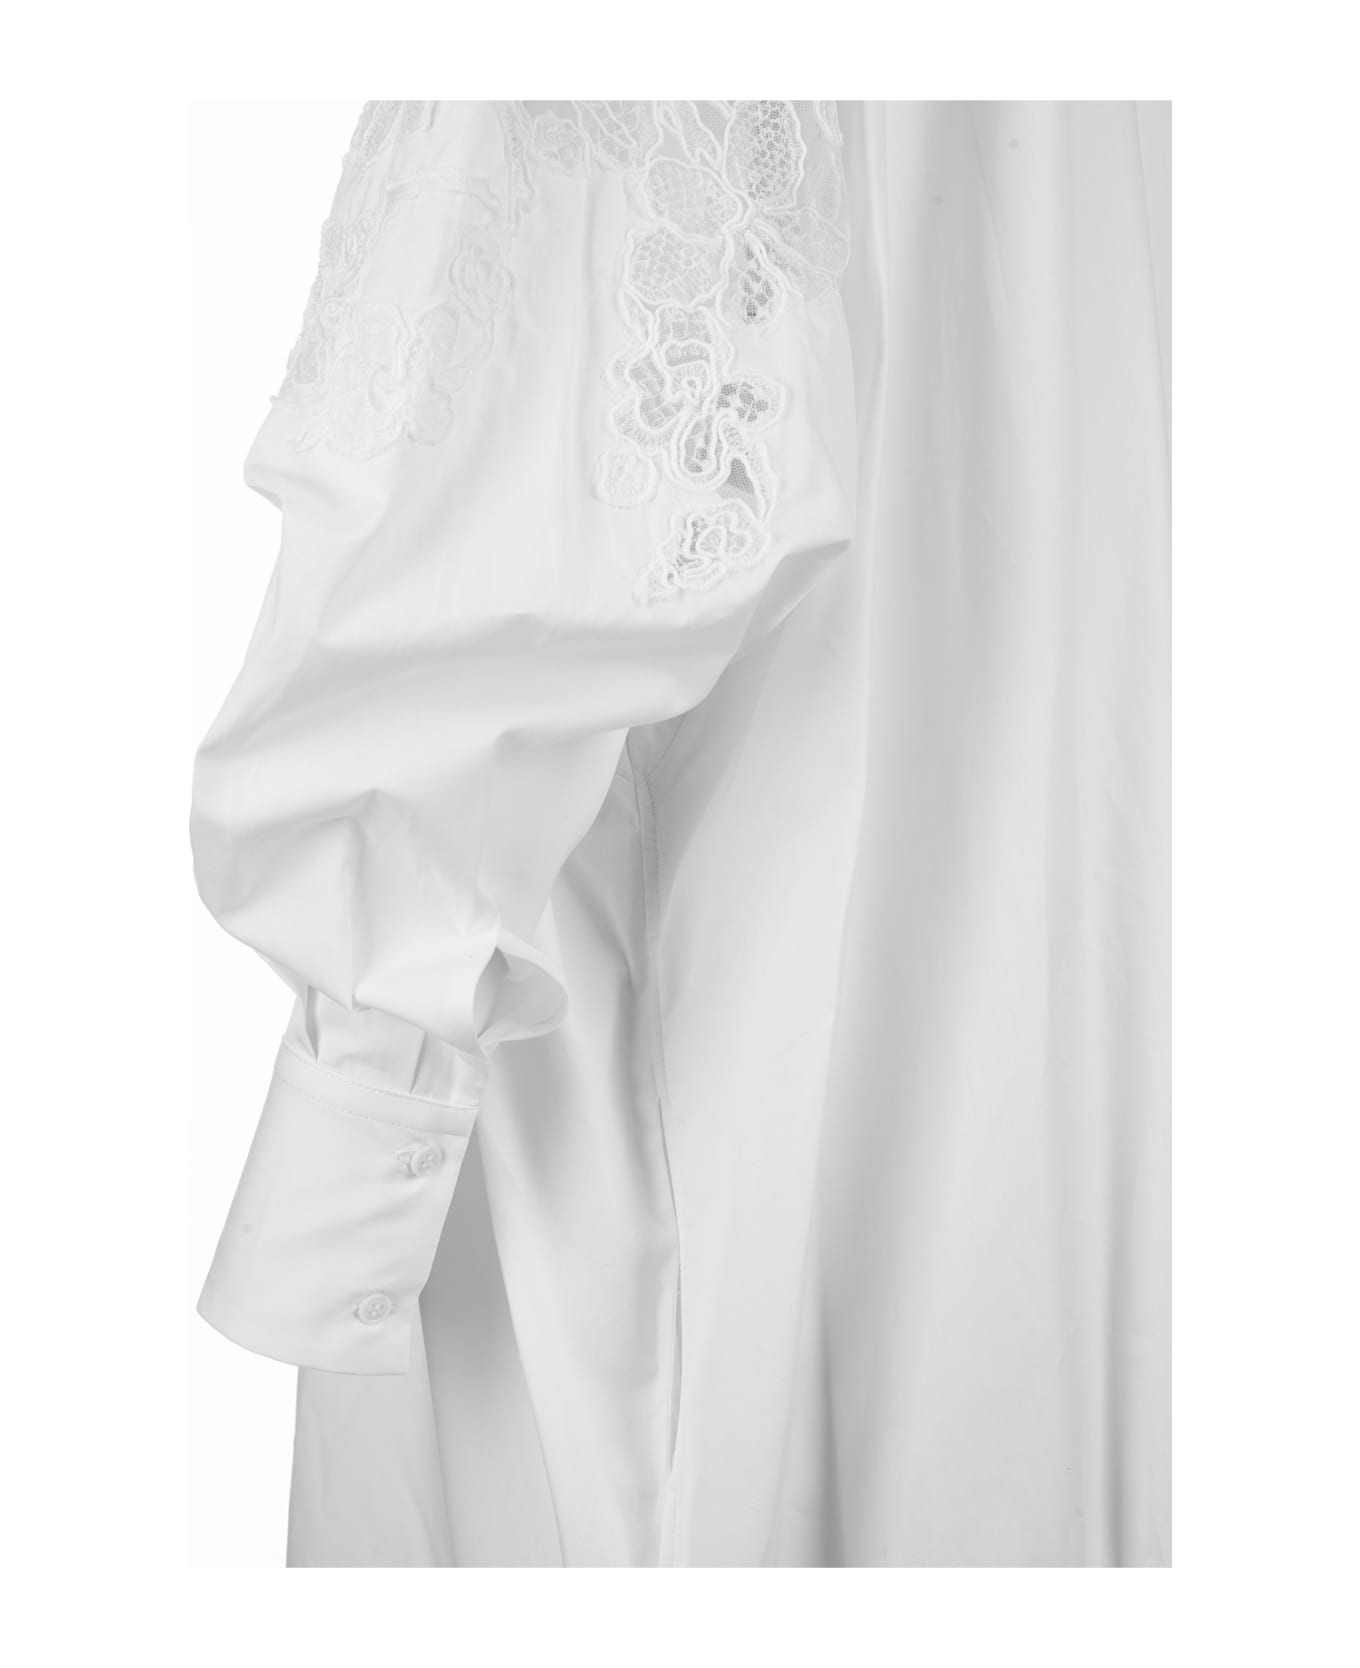 Ermanno Scervino White Oversized Shirt Dress With Lace - White